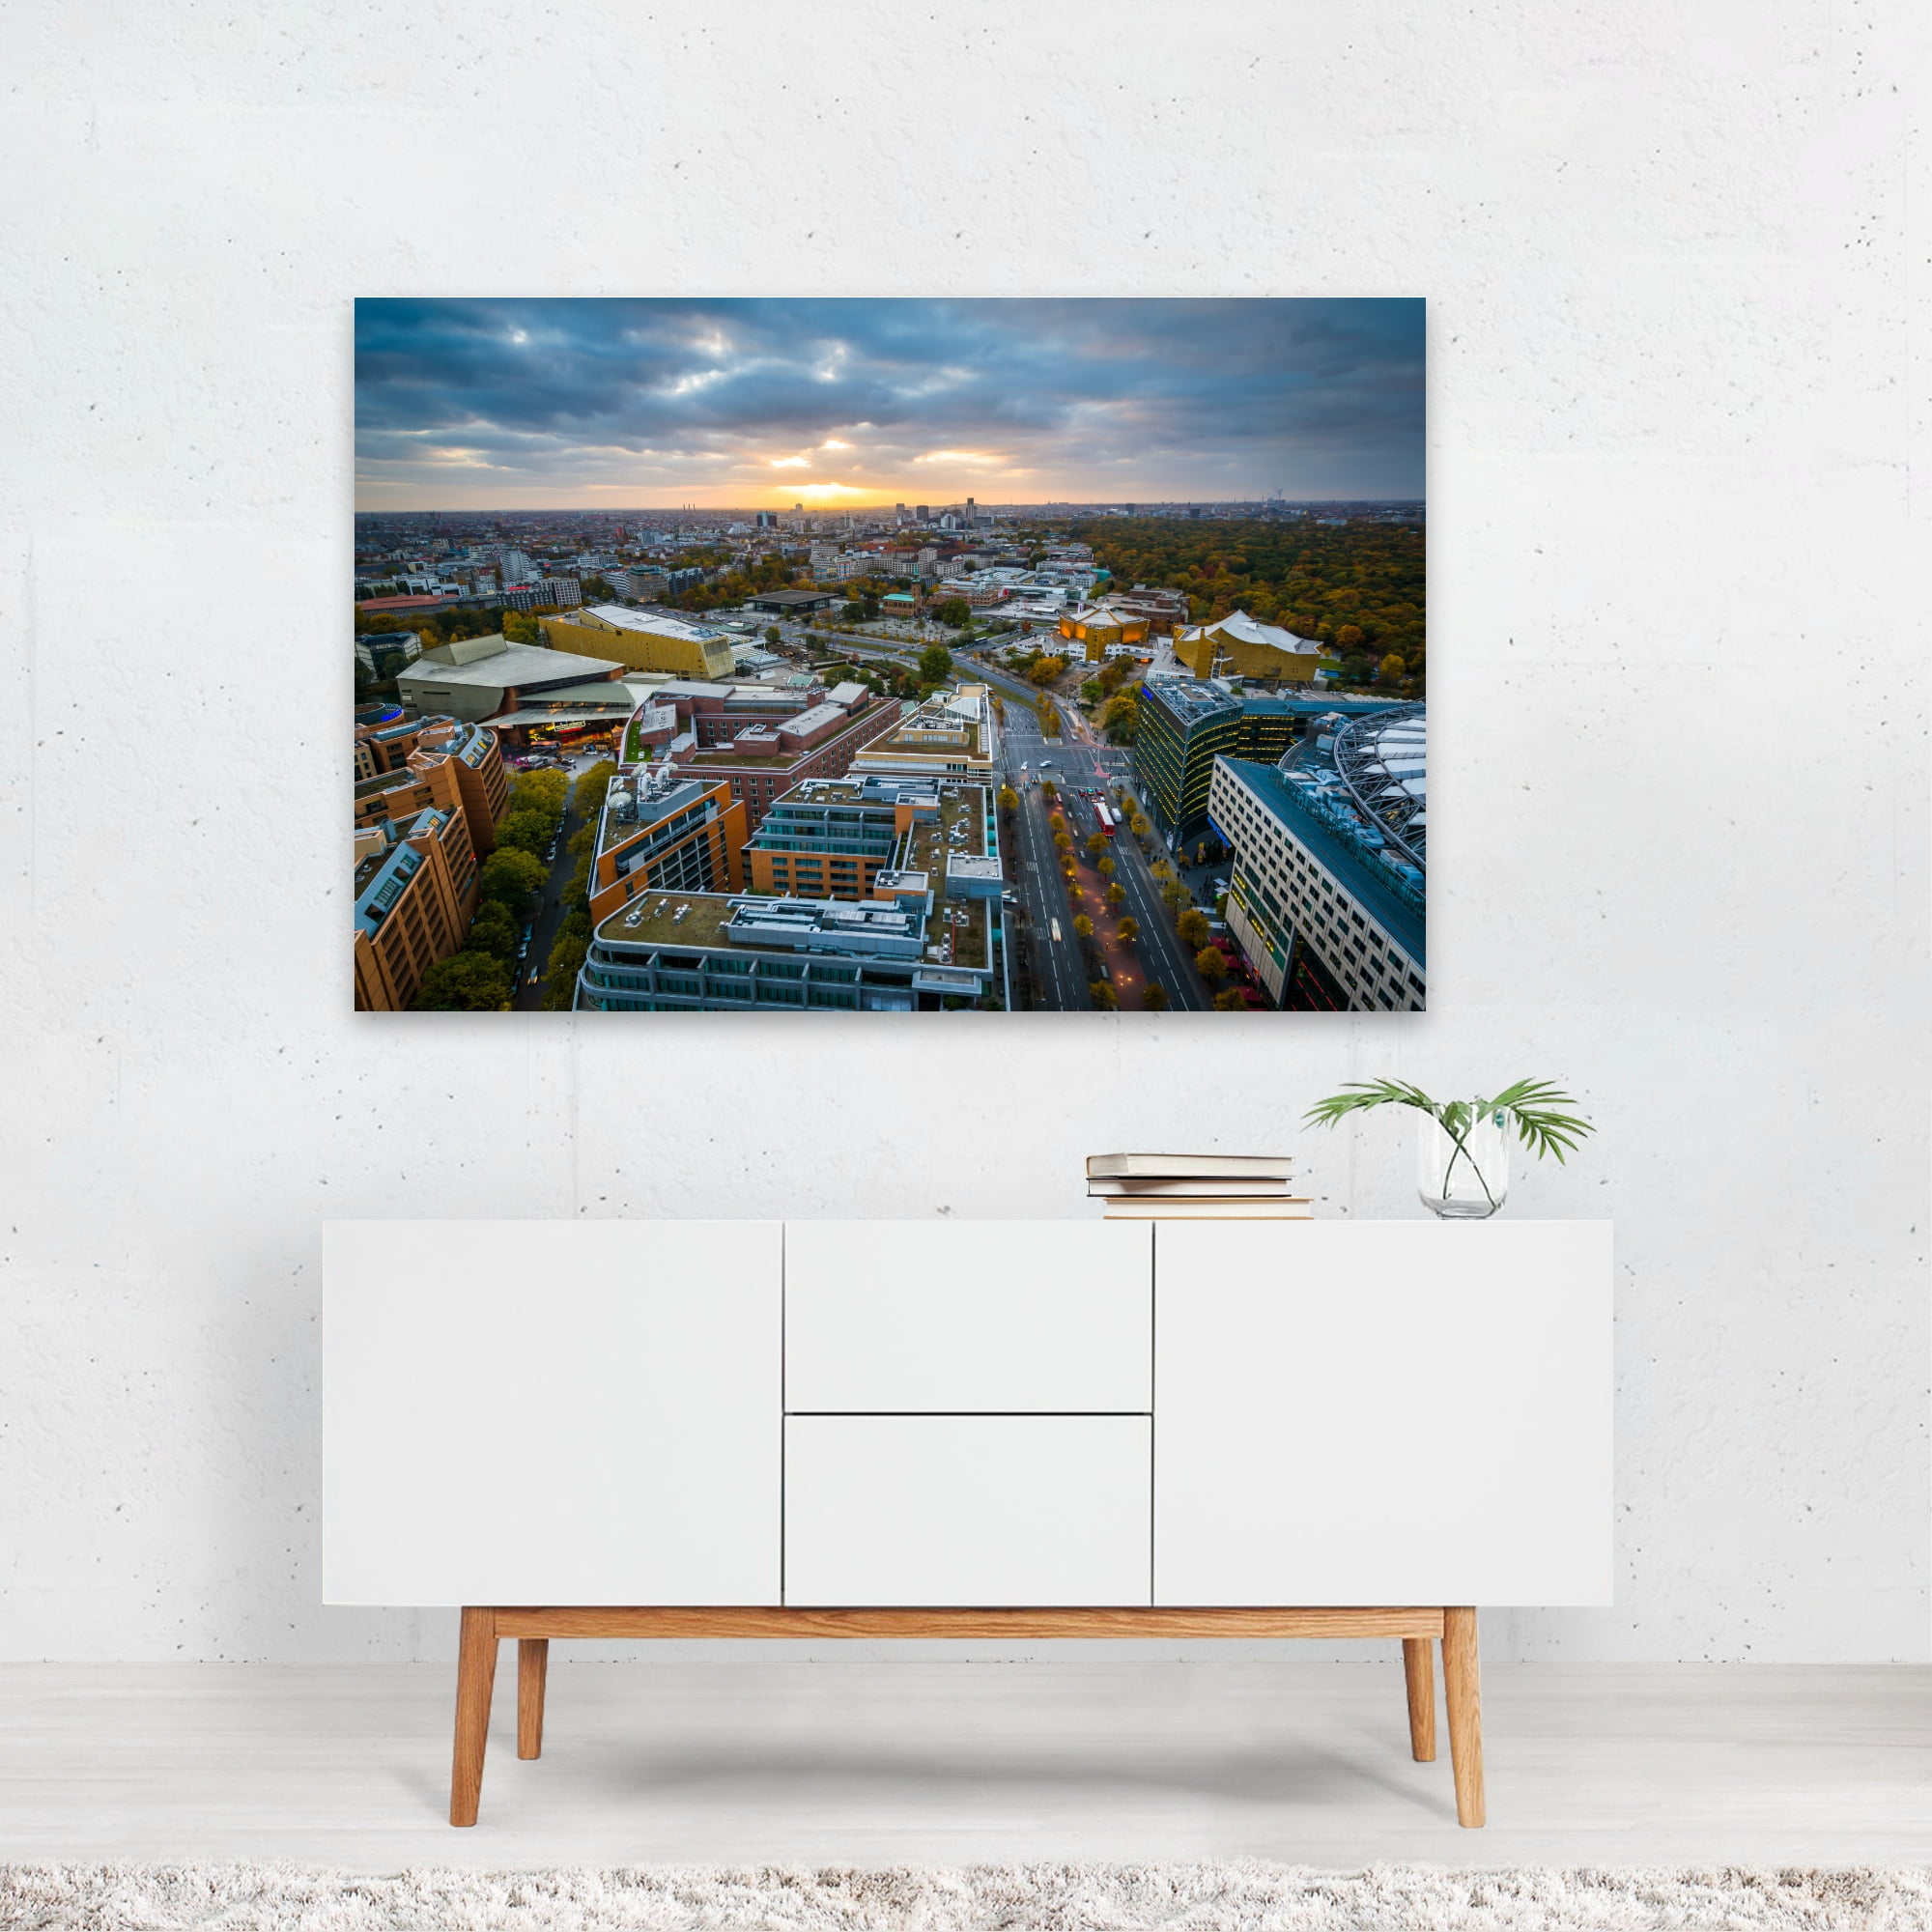 Details about   Berlin Sunset City Germany CANVAS WALL ART DECO LARGE READY TO HANG all sizes 